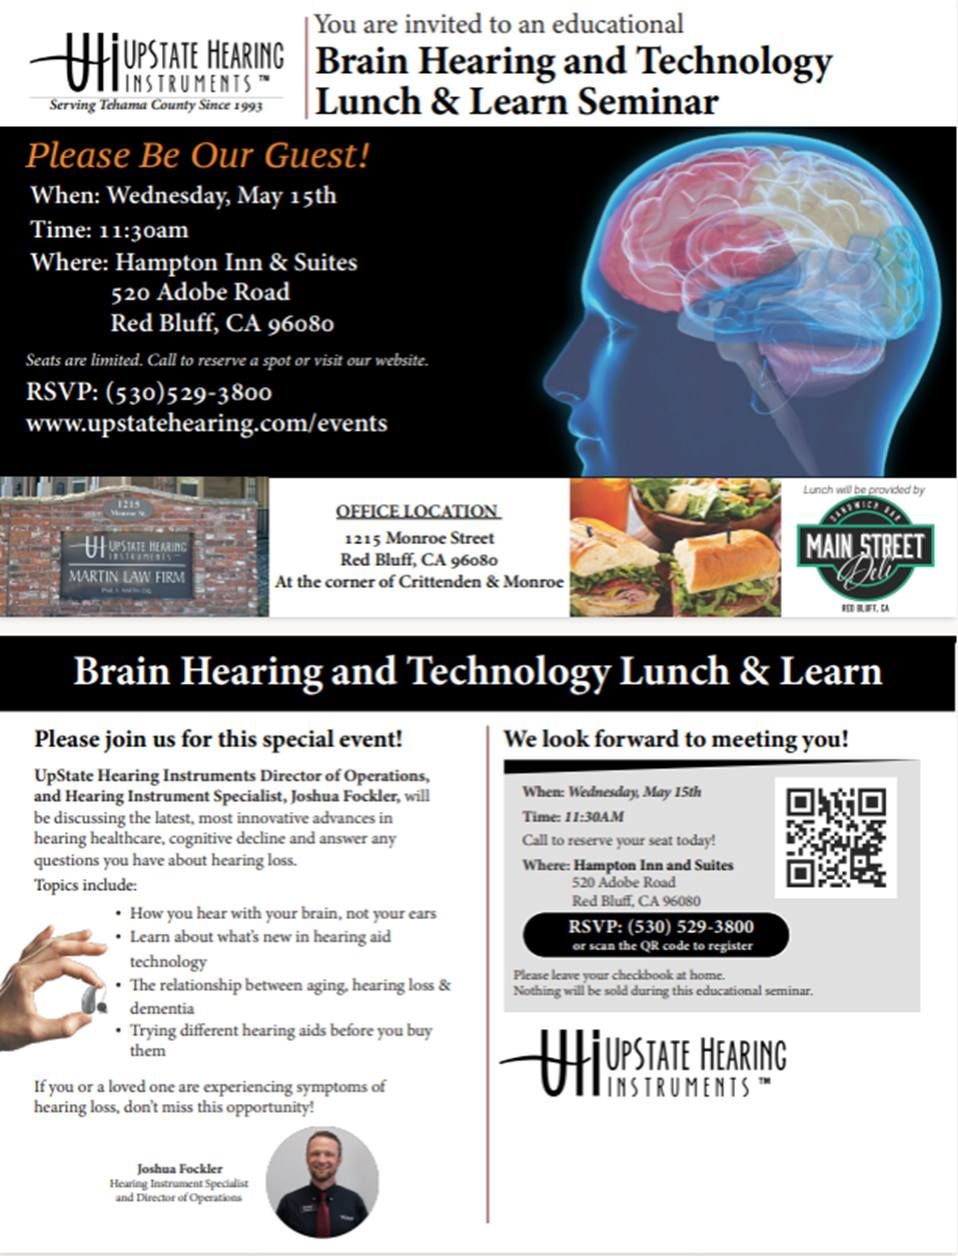 Brain Hearing and Technology Lunch and Learn